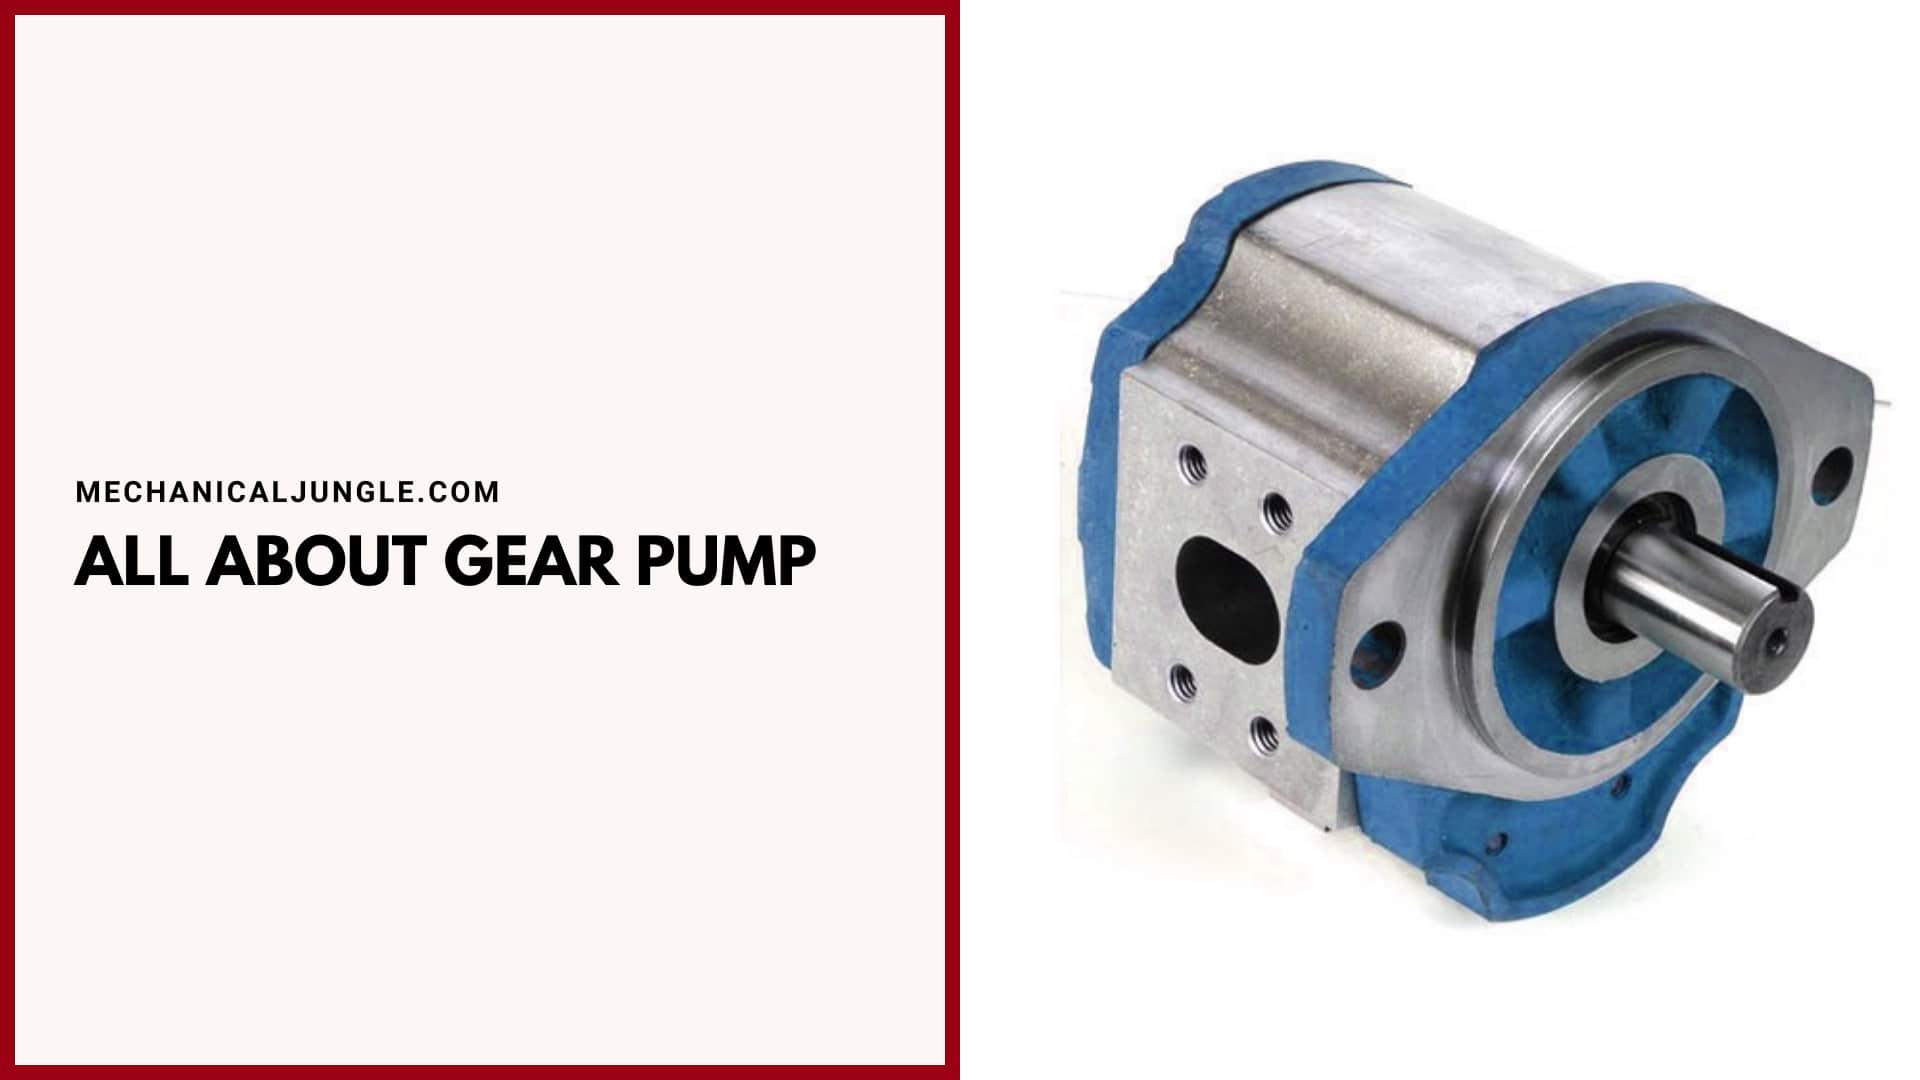 All About Gear Pump